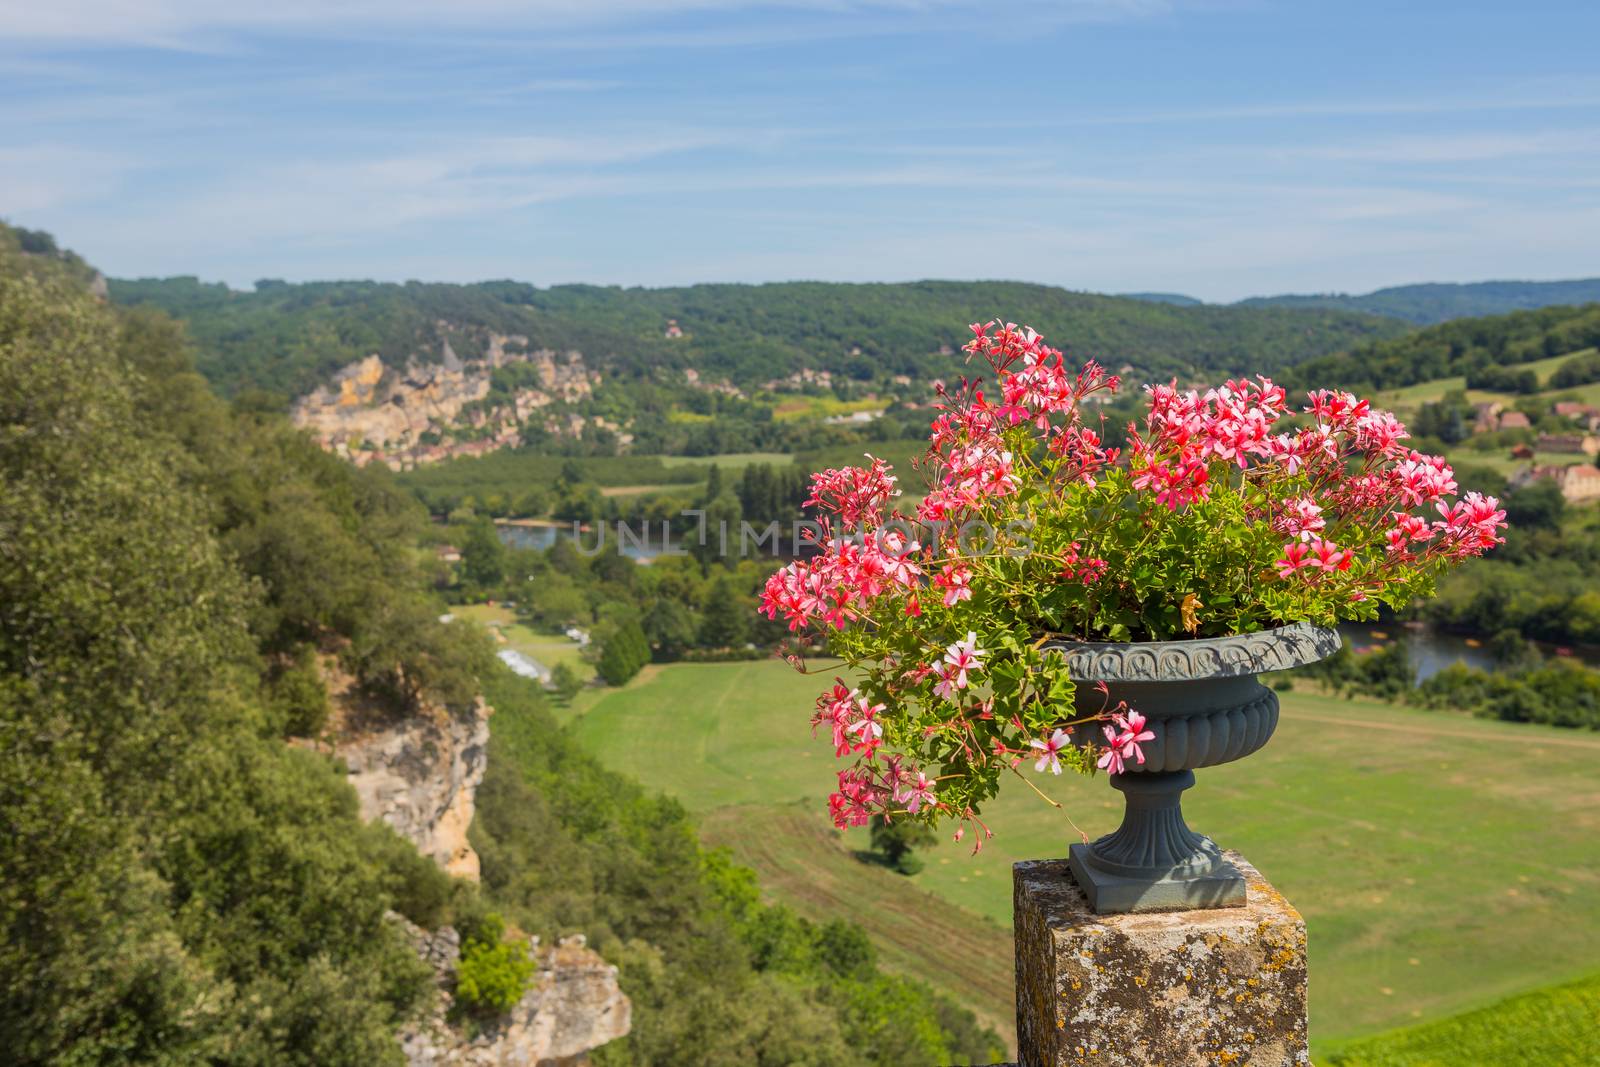 Flowers of Marqueyssac gardens. View to La Roque-Gageac, Dordogne, Countryside french landscape with Dordogne river, fields and hills. Travel destination